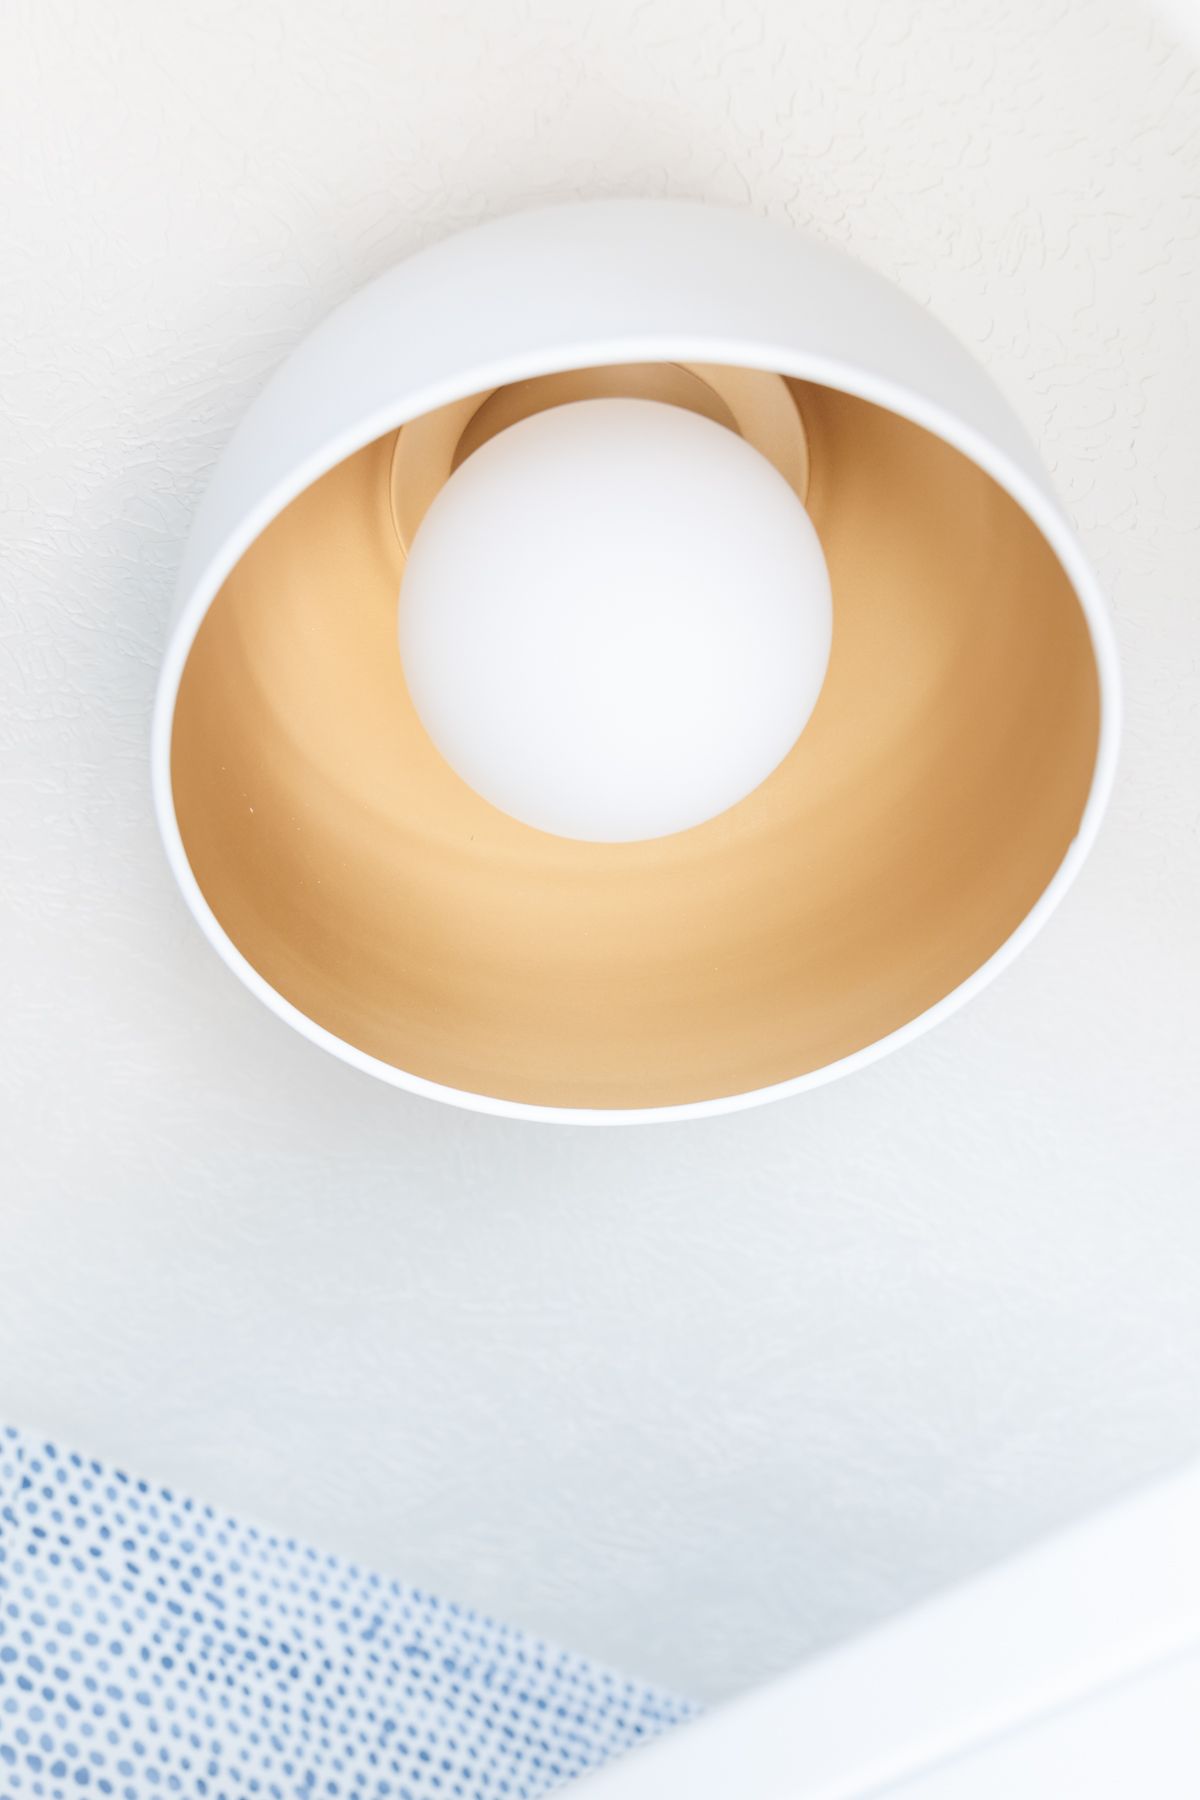 A flush mount light fixture with a gold interior and large white light bulb.